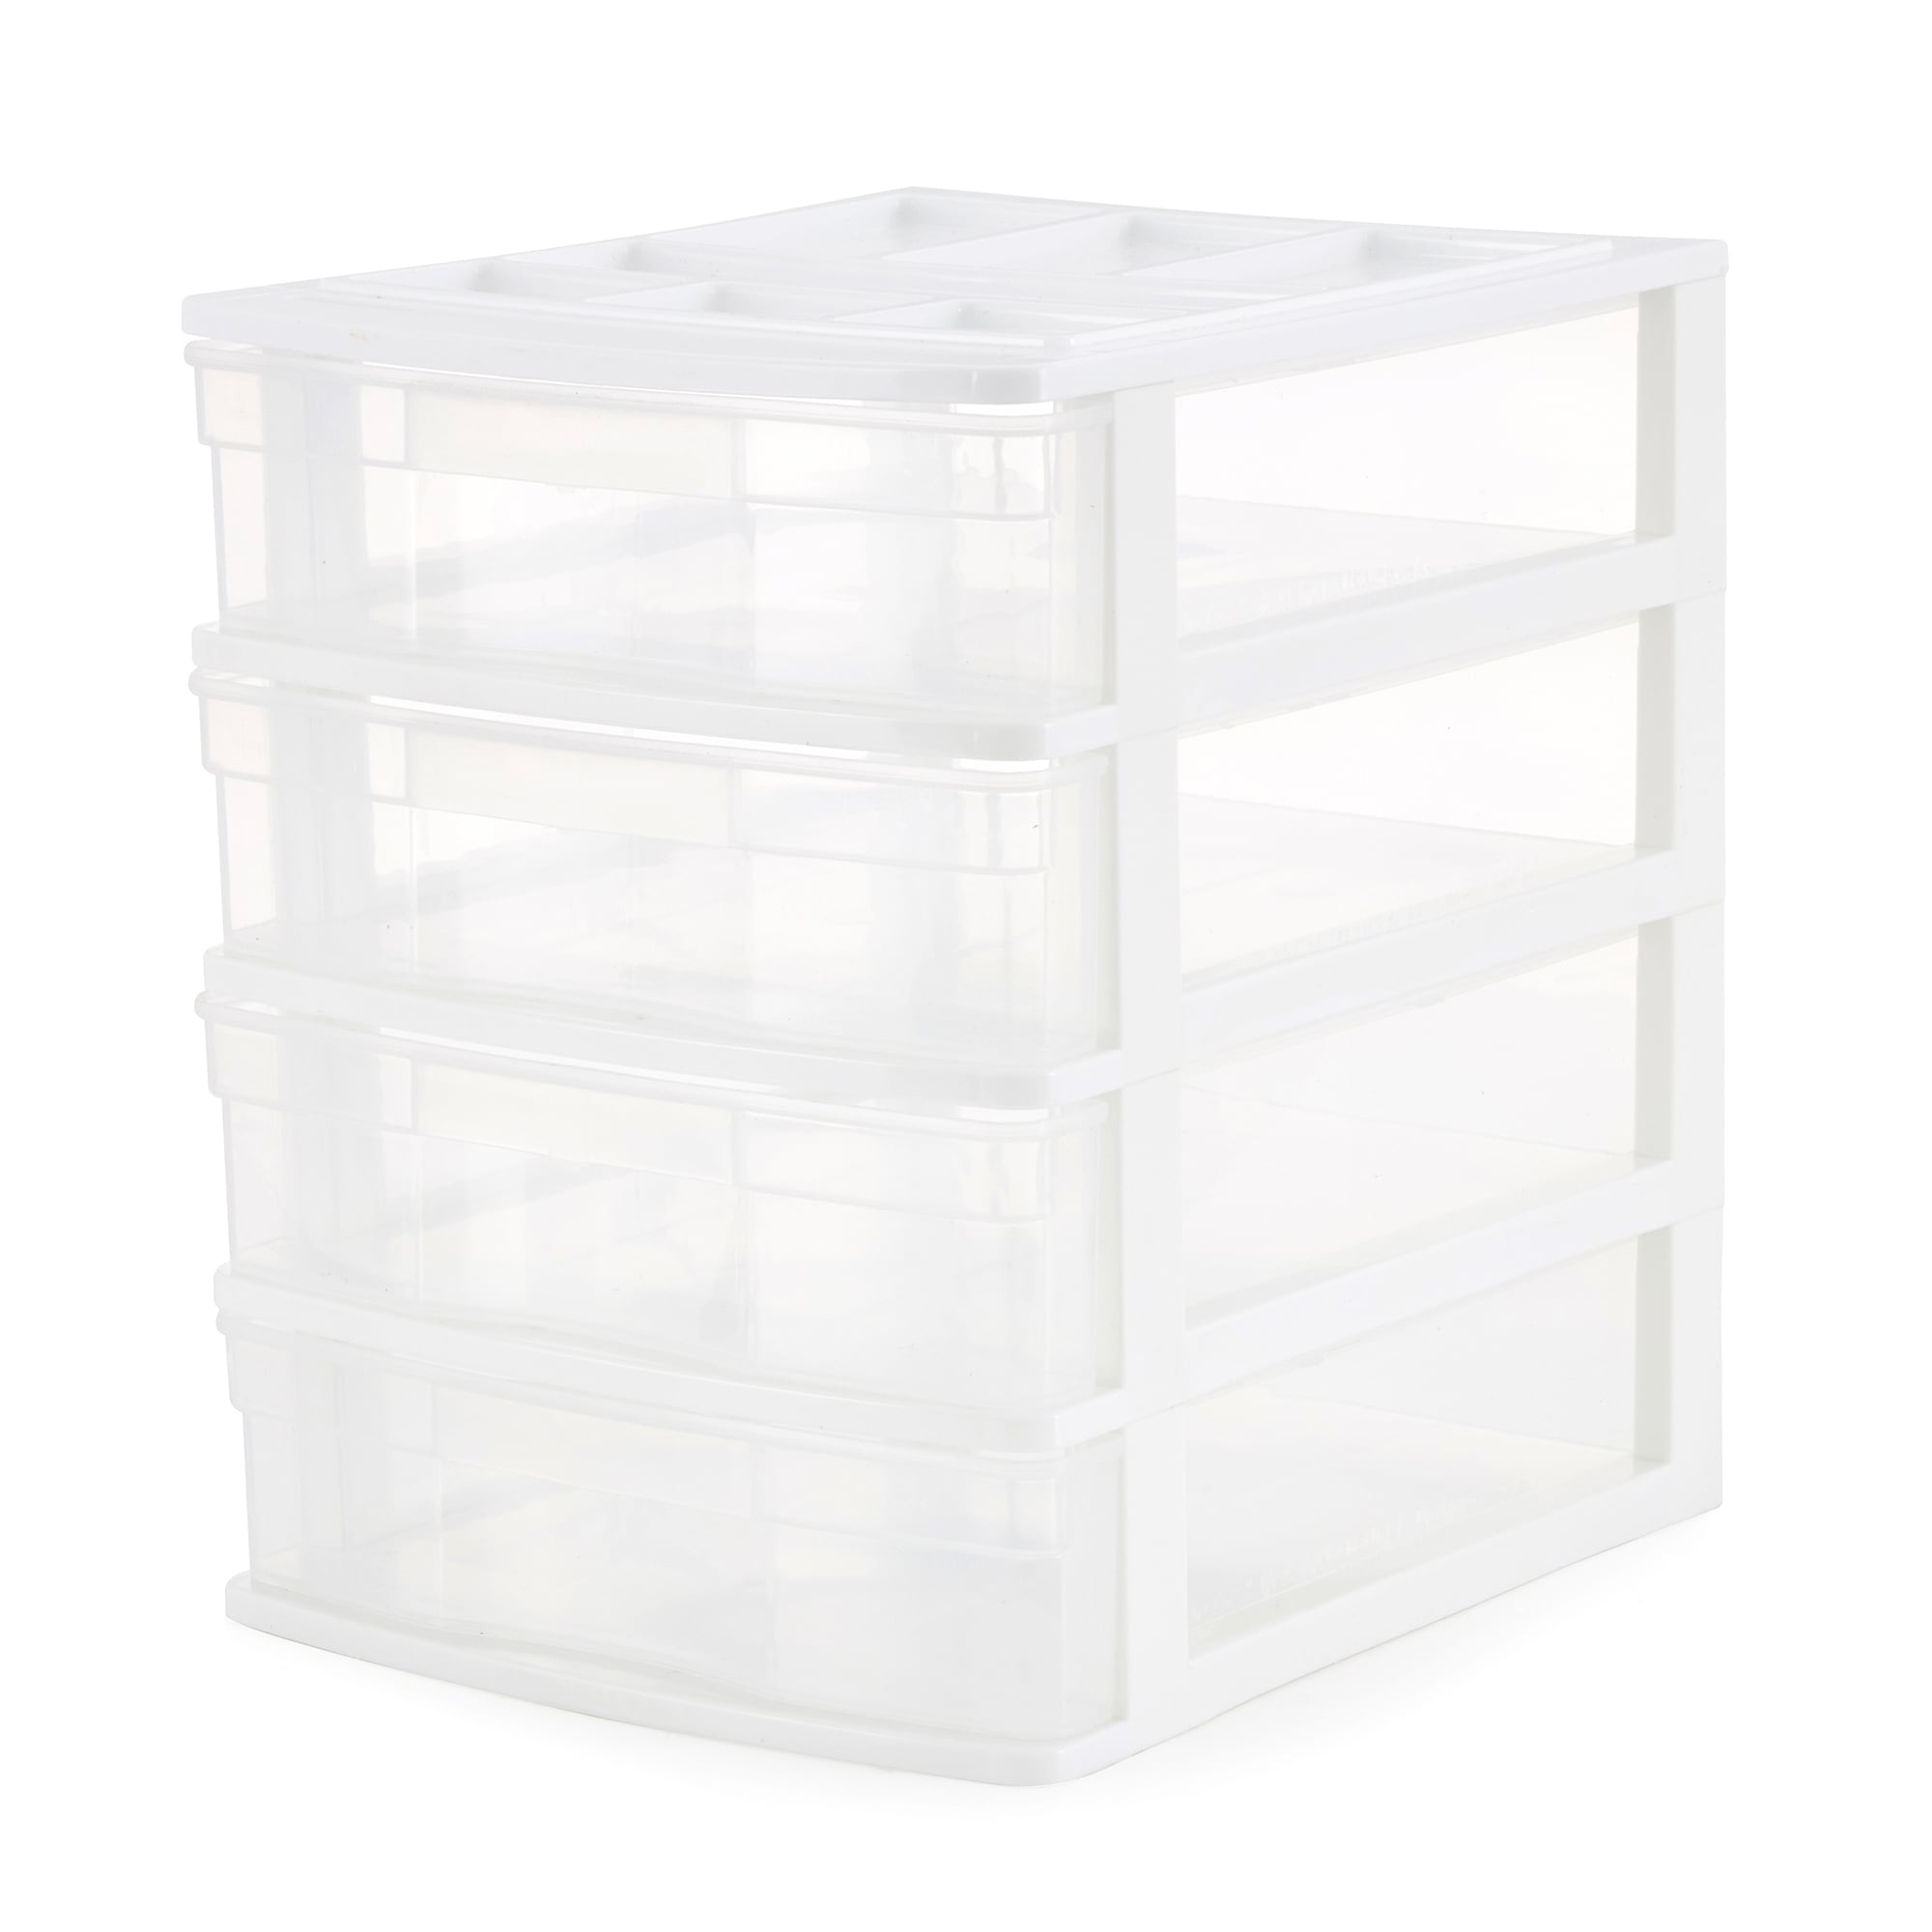 5 Unit Plastic Shelves Drawer Organizer Shelving Storage Set Solution  Stackable With Clear Drawer Handles for Home Office School Kids Cabinets  Dresser